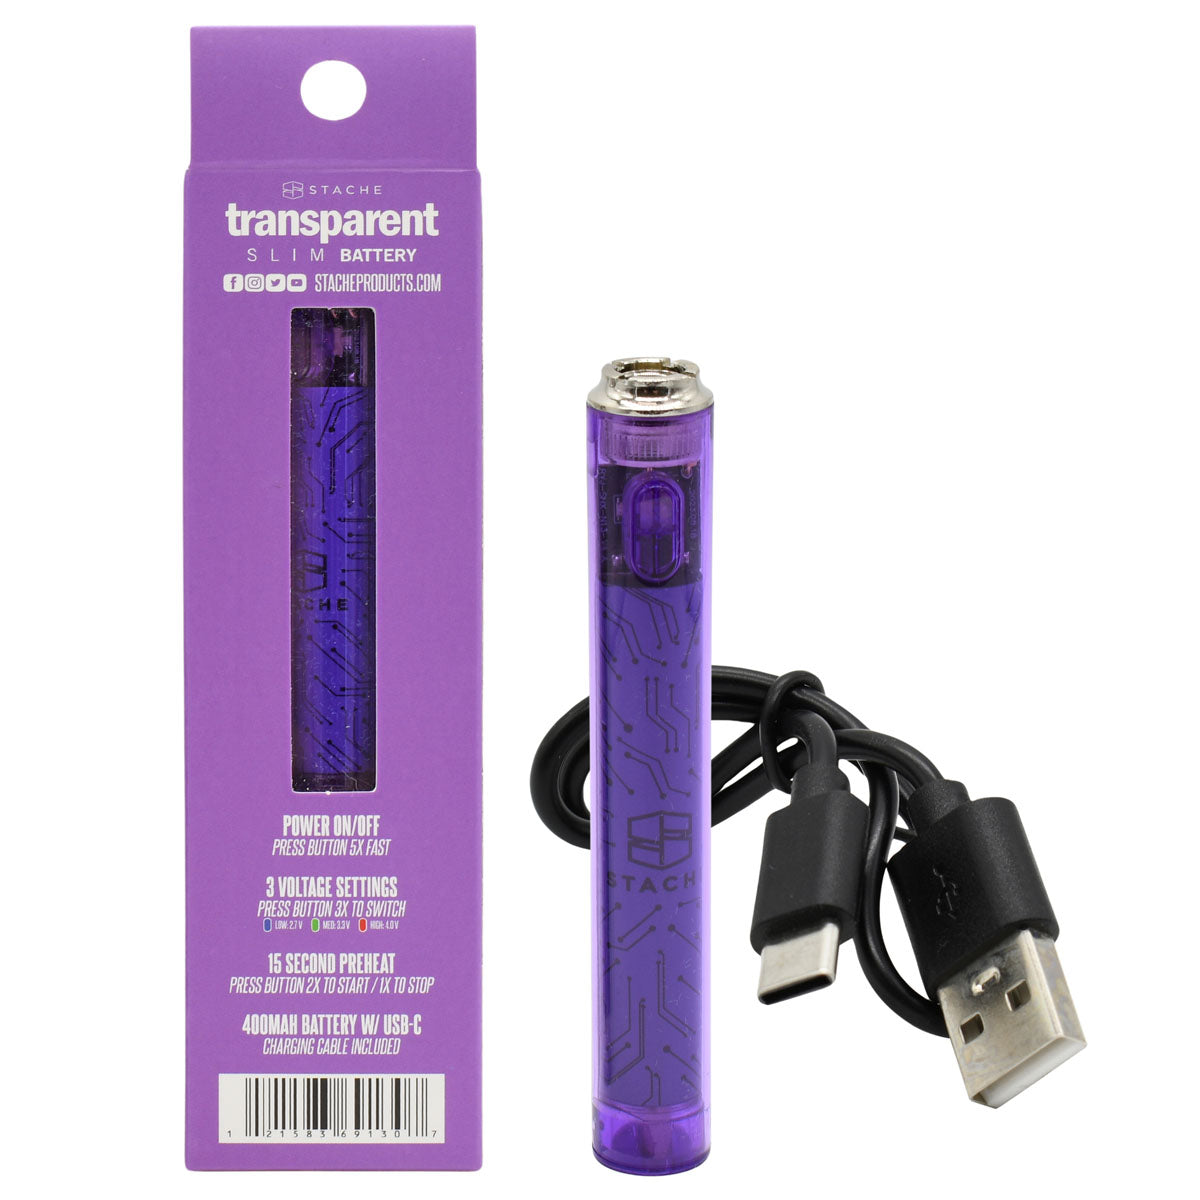 Stache transparent 510 vape battery - Purple option, with packaging and included USB-C charging cable.